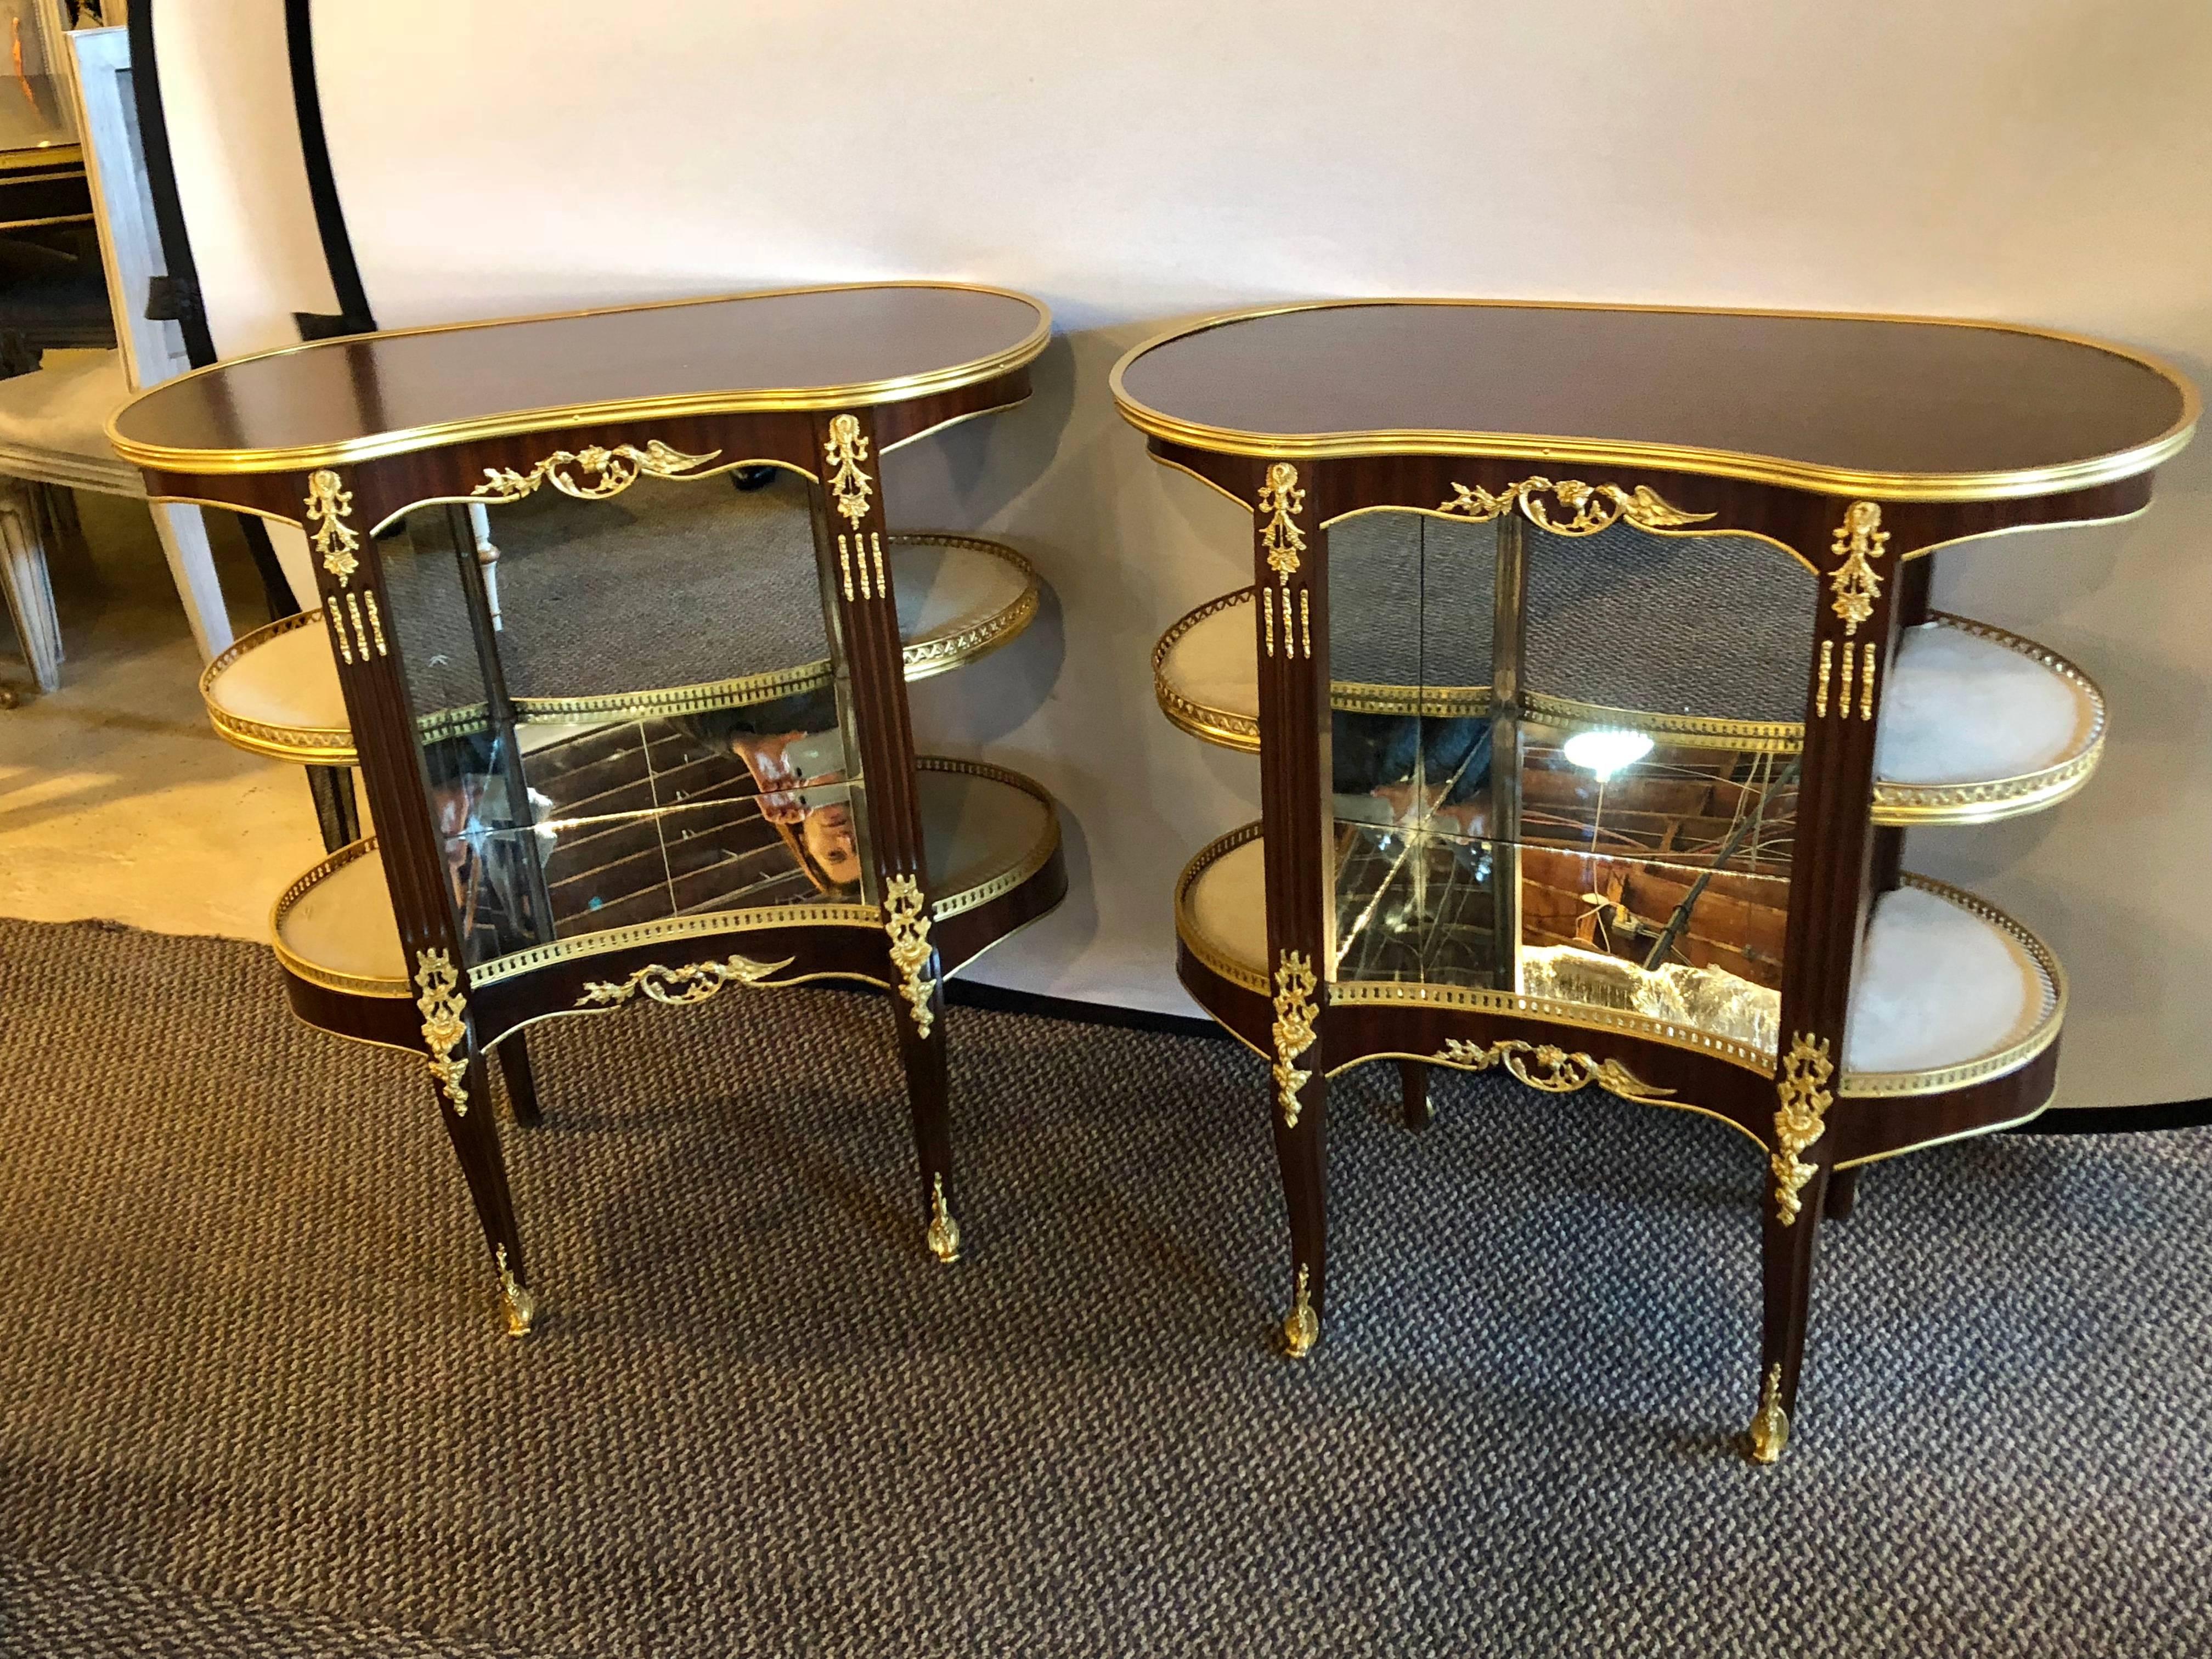 A very fine and decorative pair of Louis XV Hollywood Regency style crotch mahogany vitrine form end tables or nightstands. These custom quality nightstands can be used as end tables or showcase pieces in a vestibule. The bronze mounts are